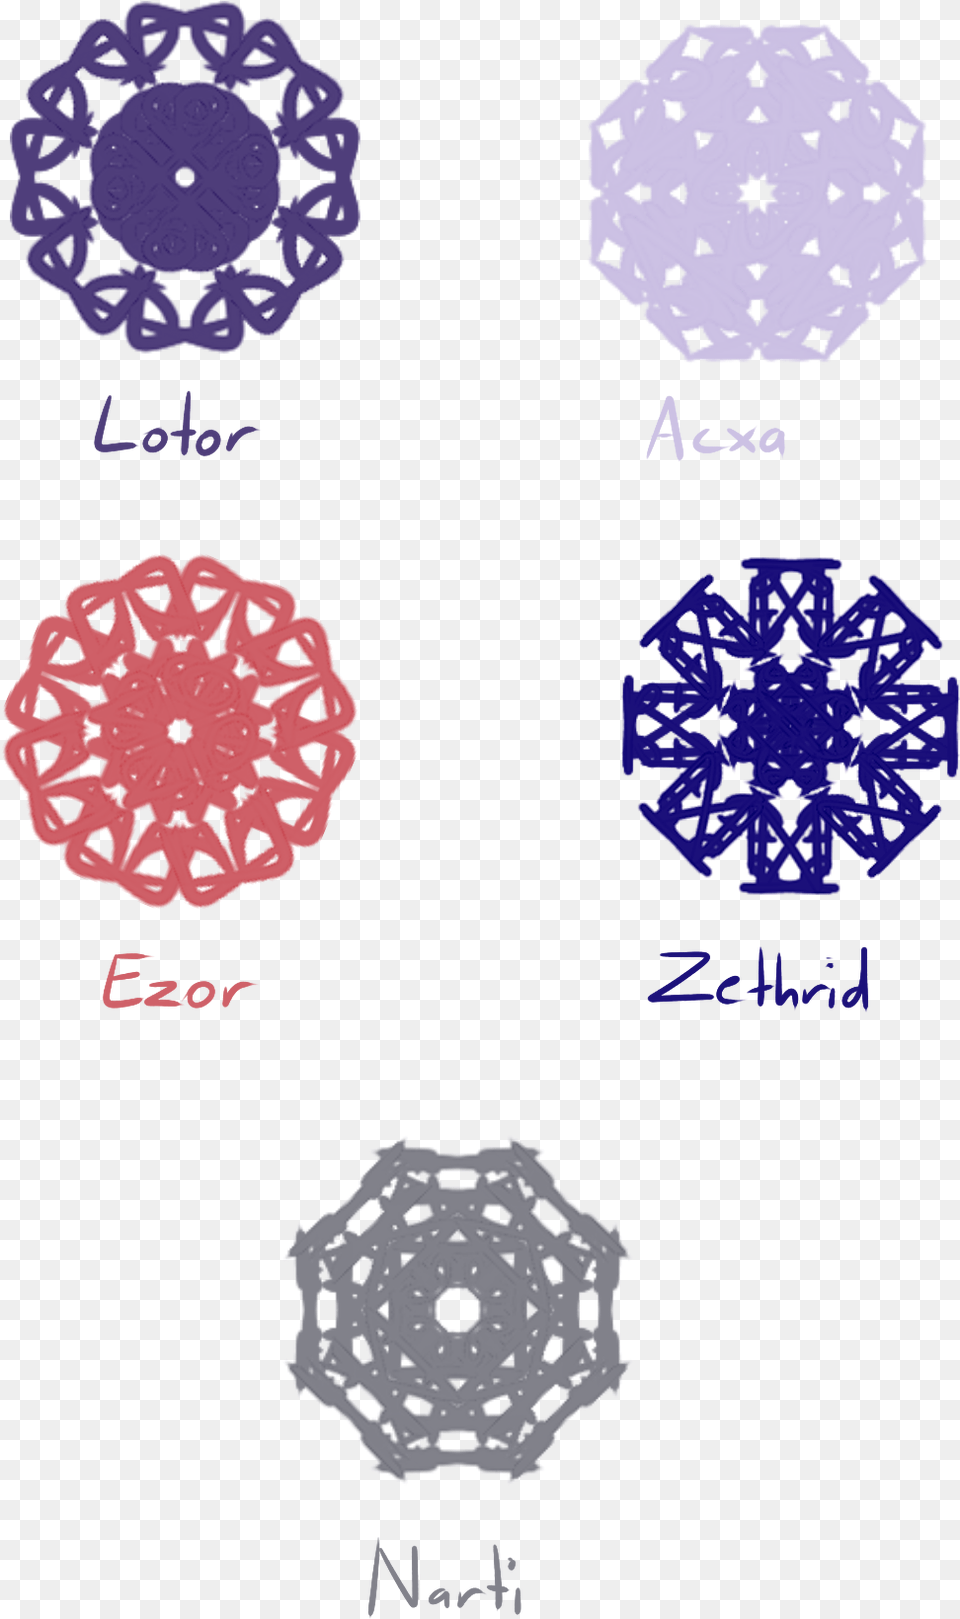 And Some More Voltron Doily Designs Illustration, Accessories, Jewelry, Gemstone, Sphere Png